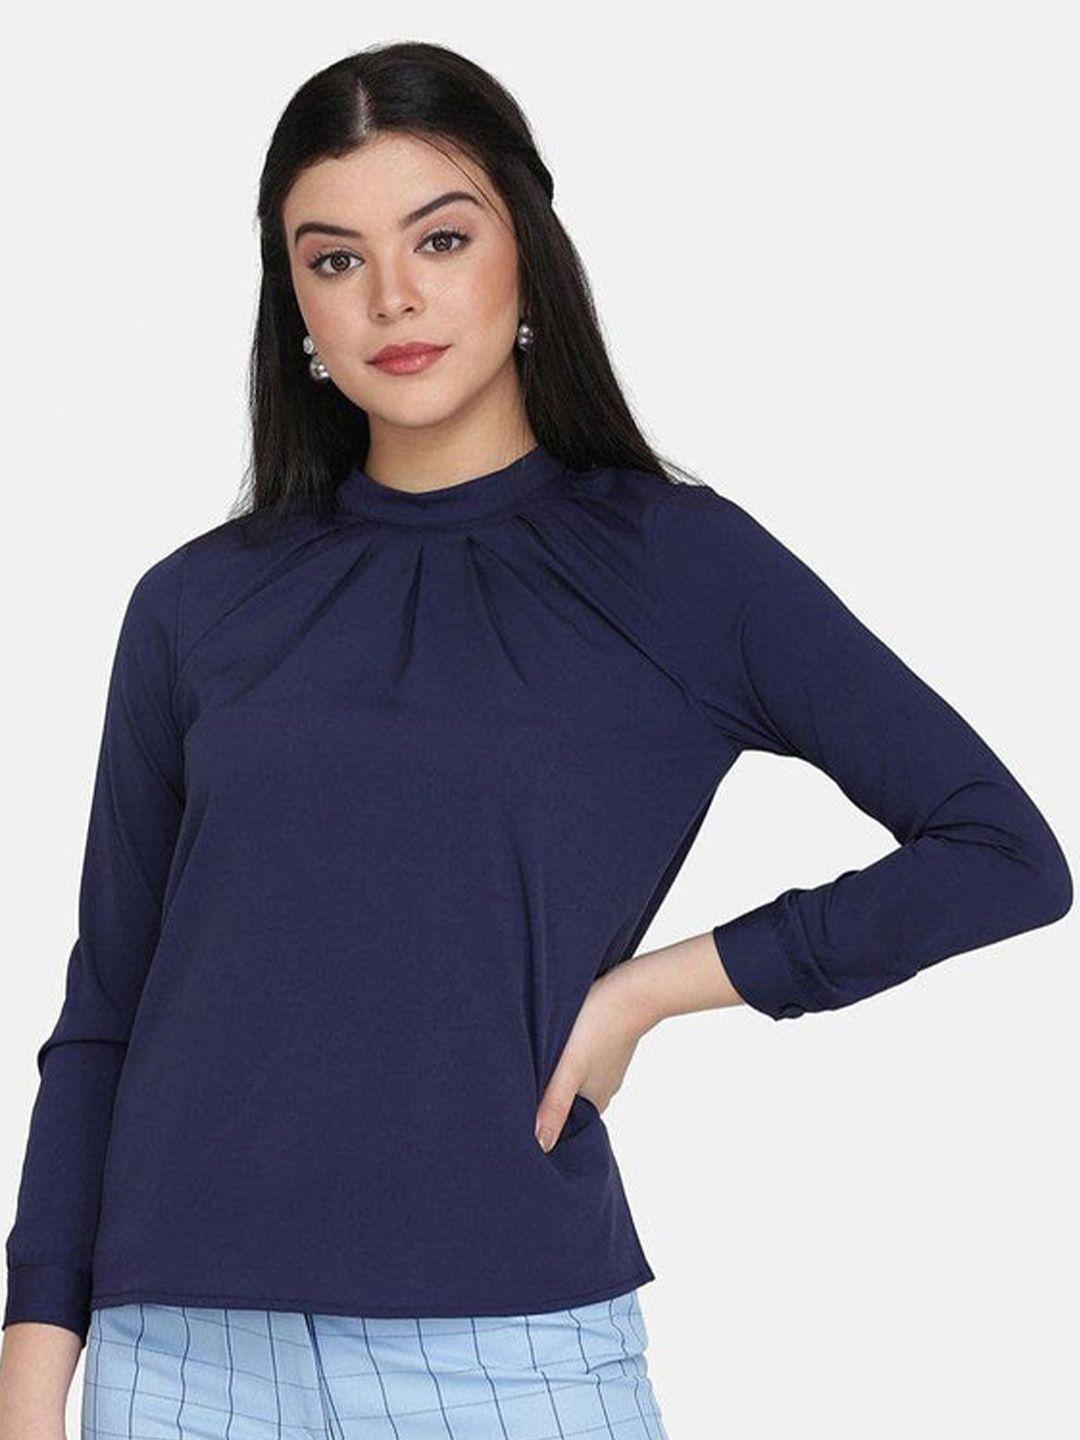 powersutra gathered high neck top